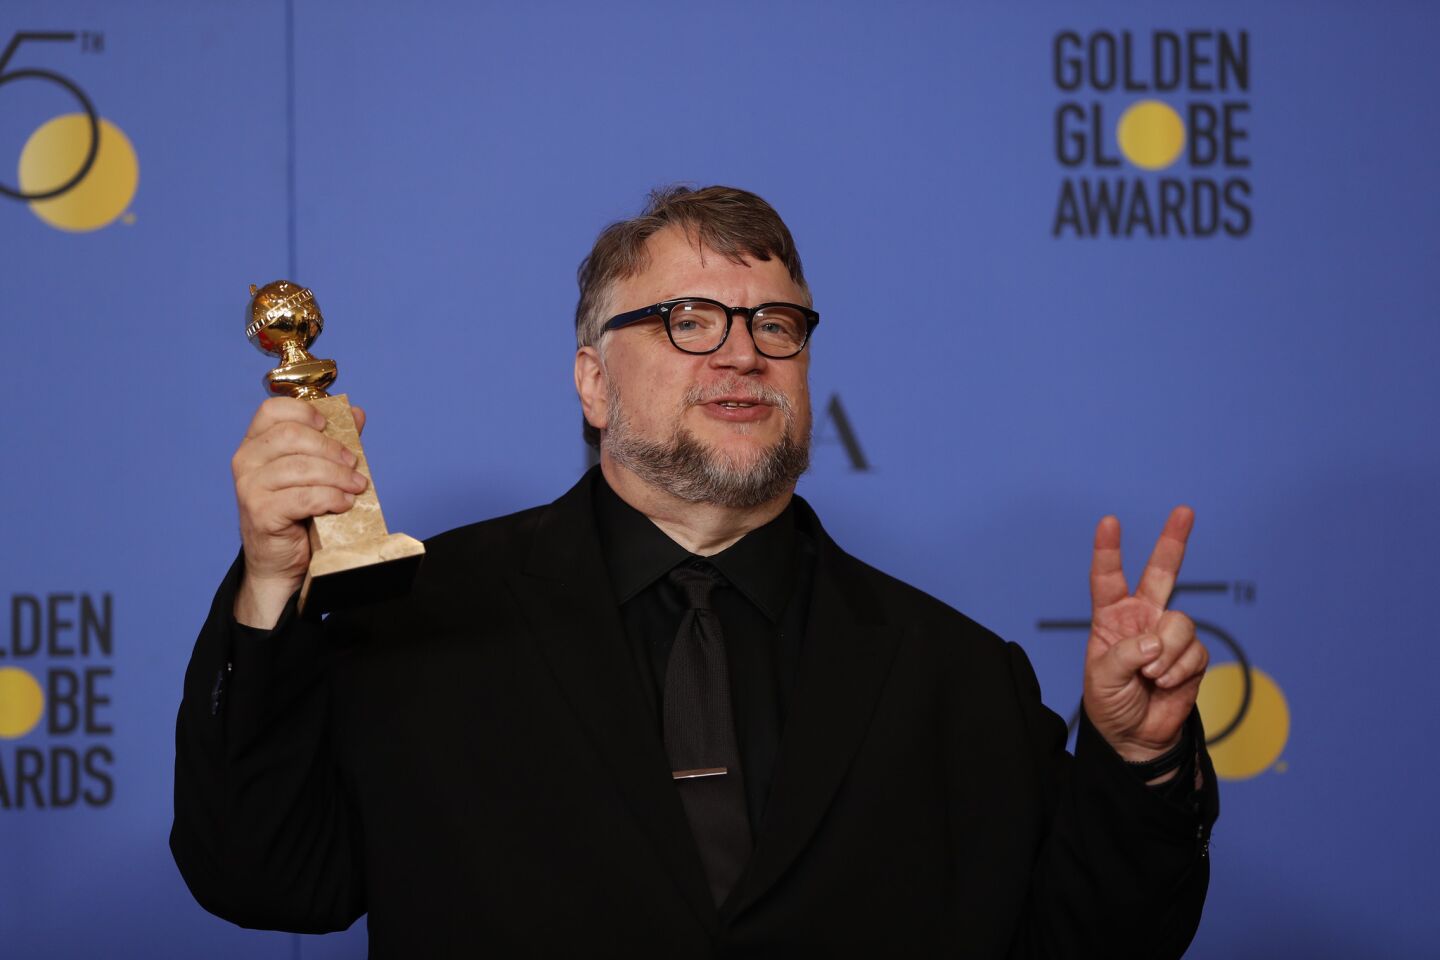 Guillermo del Toro won the film directing prize for "The Shape of Water. "